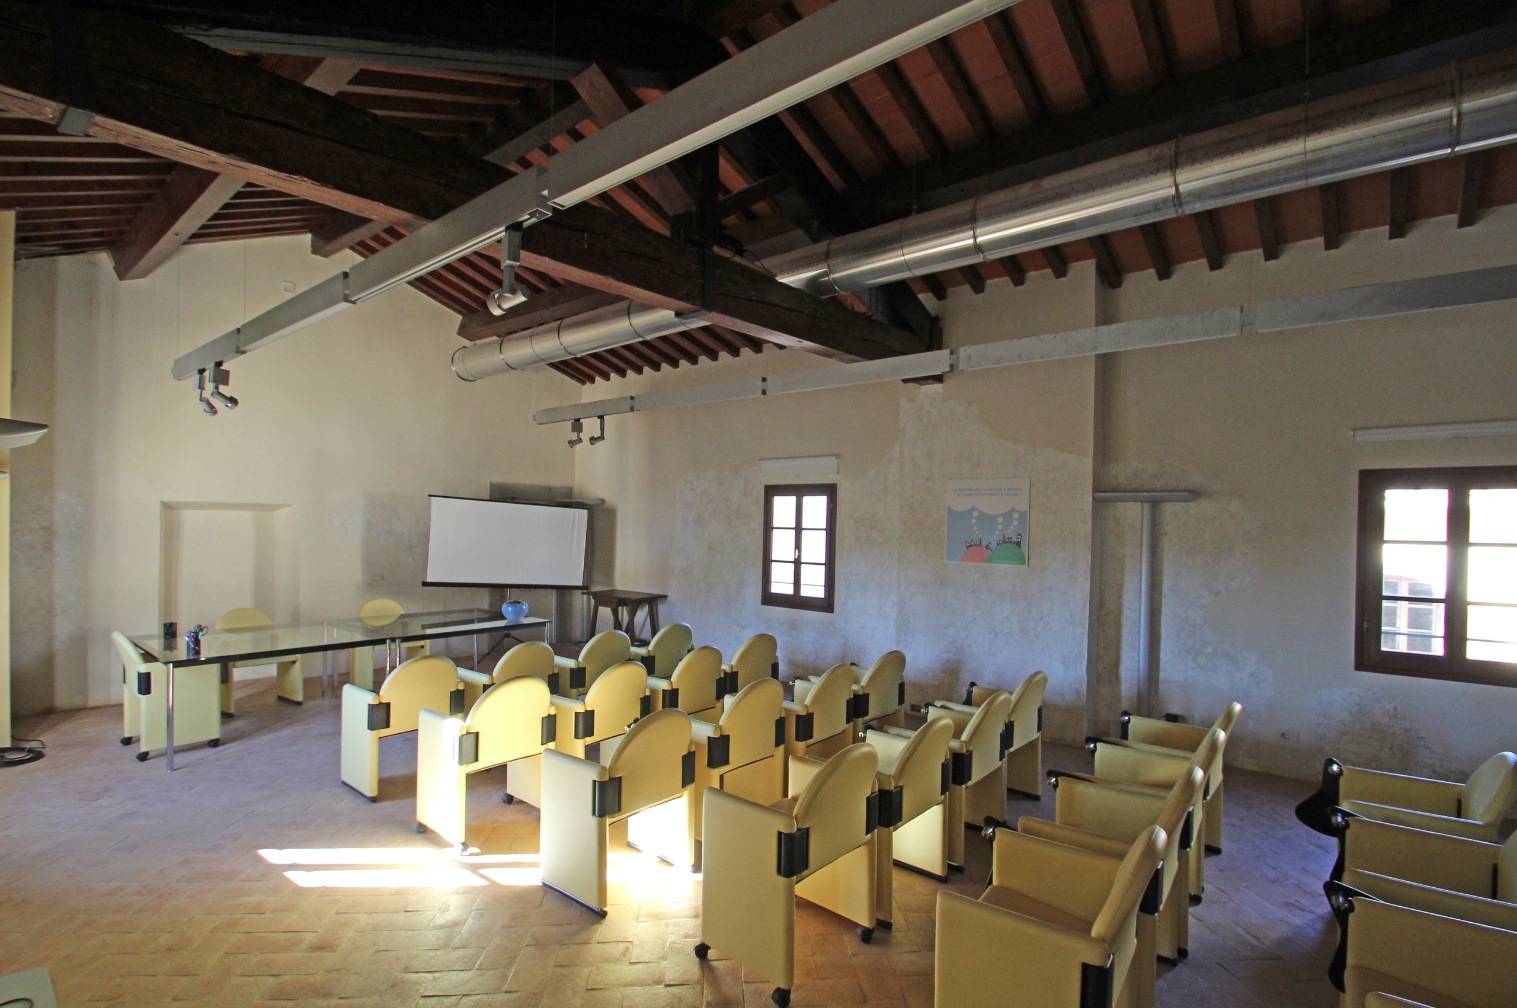 One of the classrooms